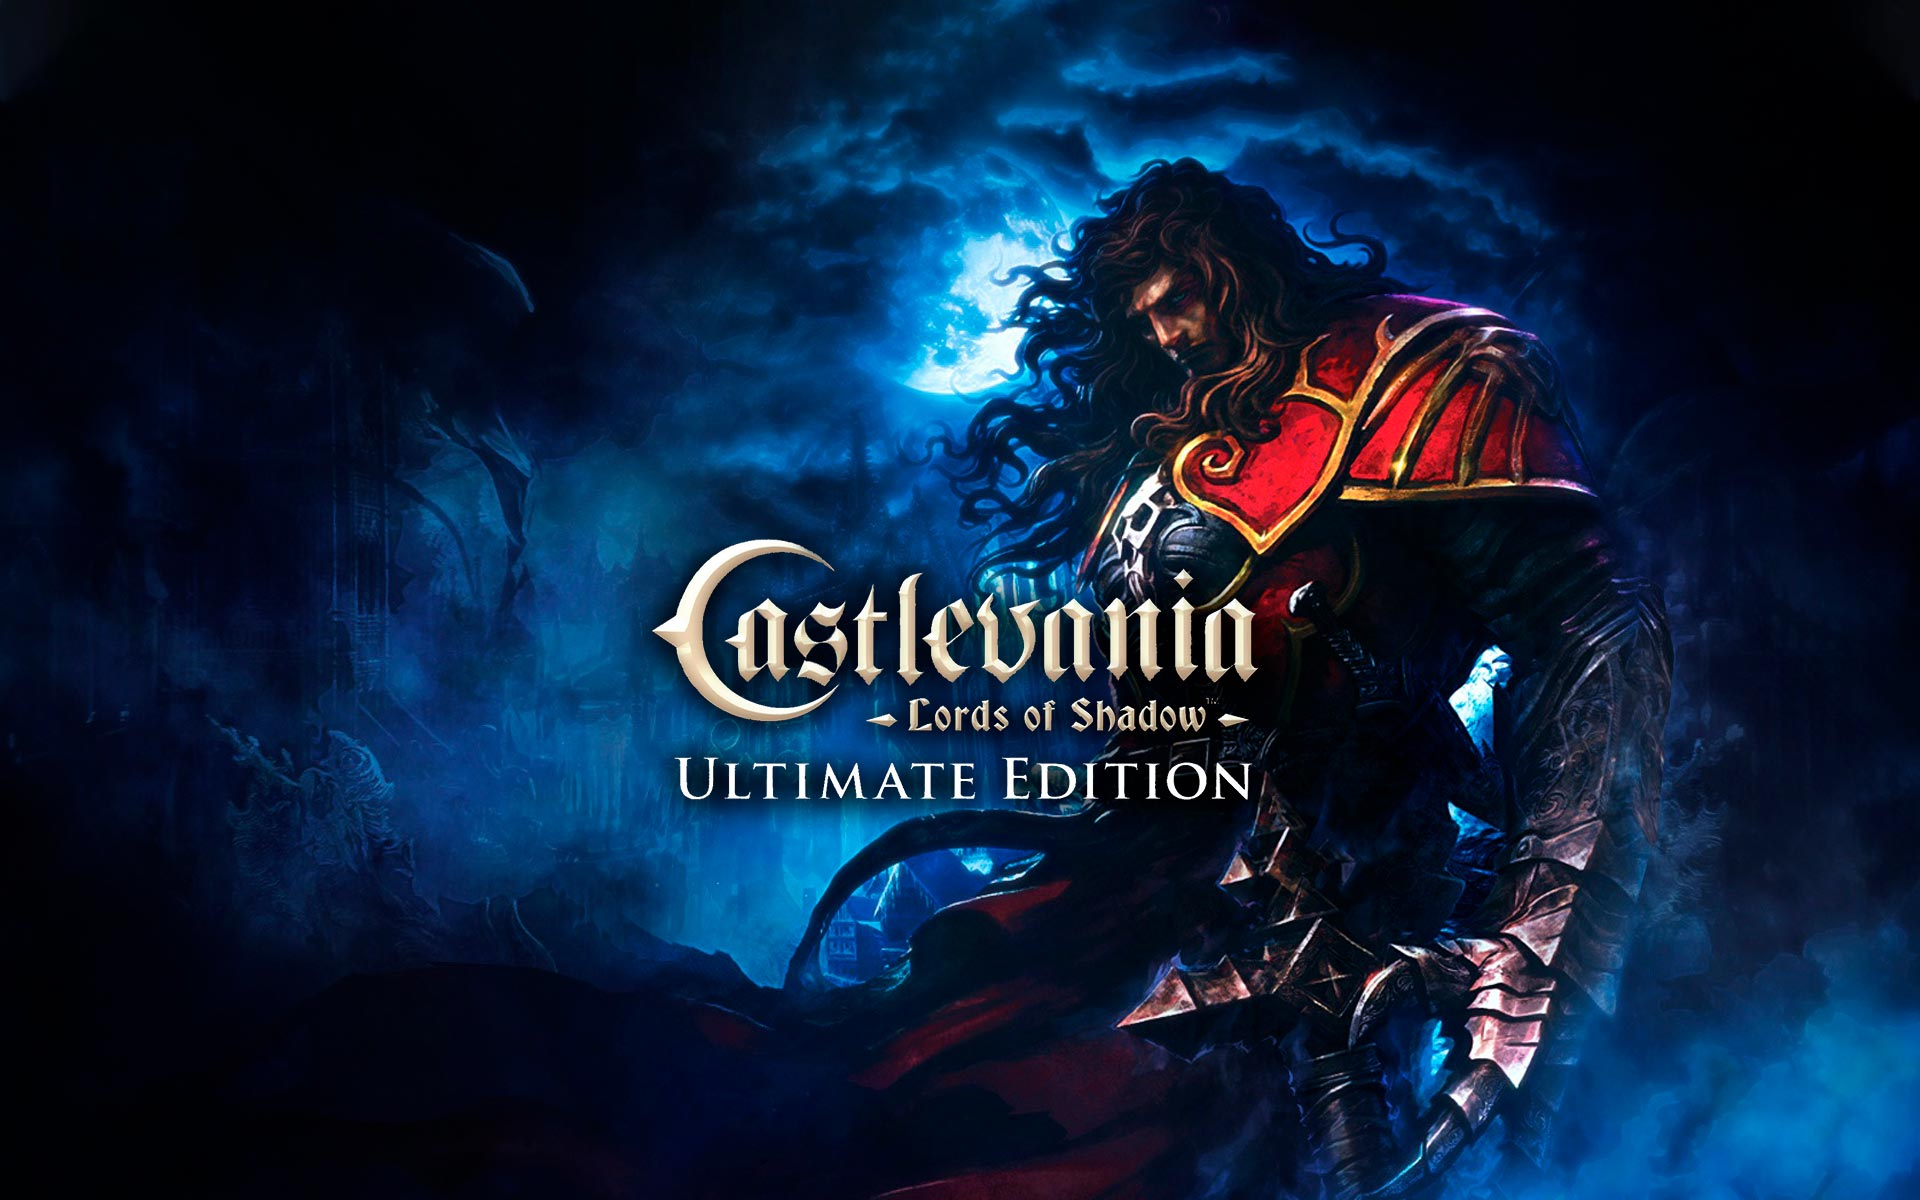 Castlevania lord of shadow steam